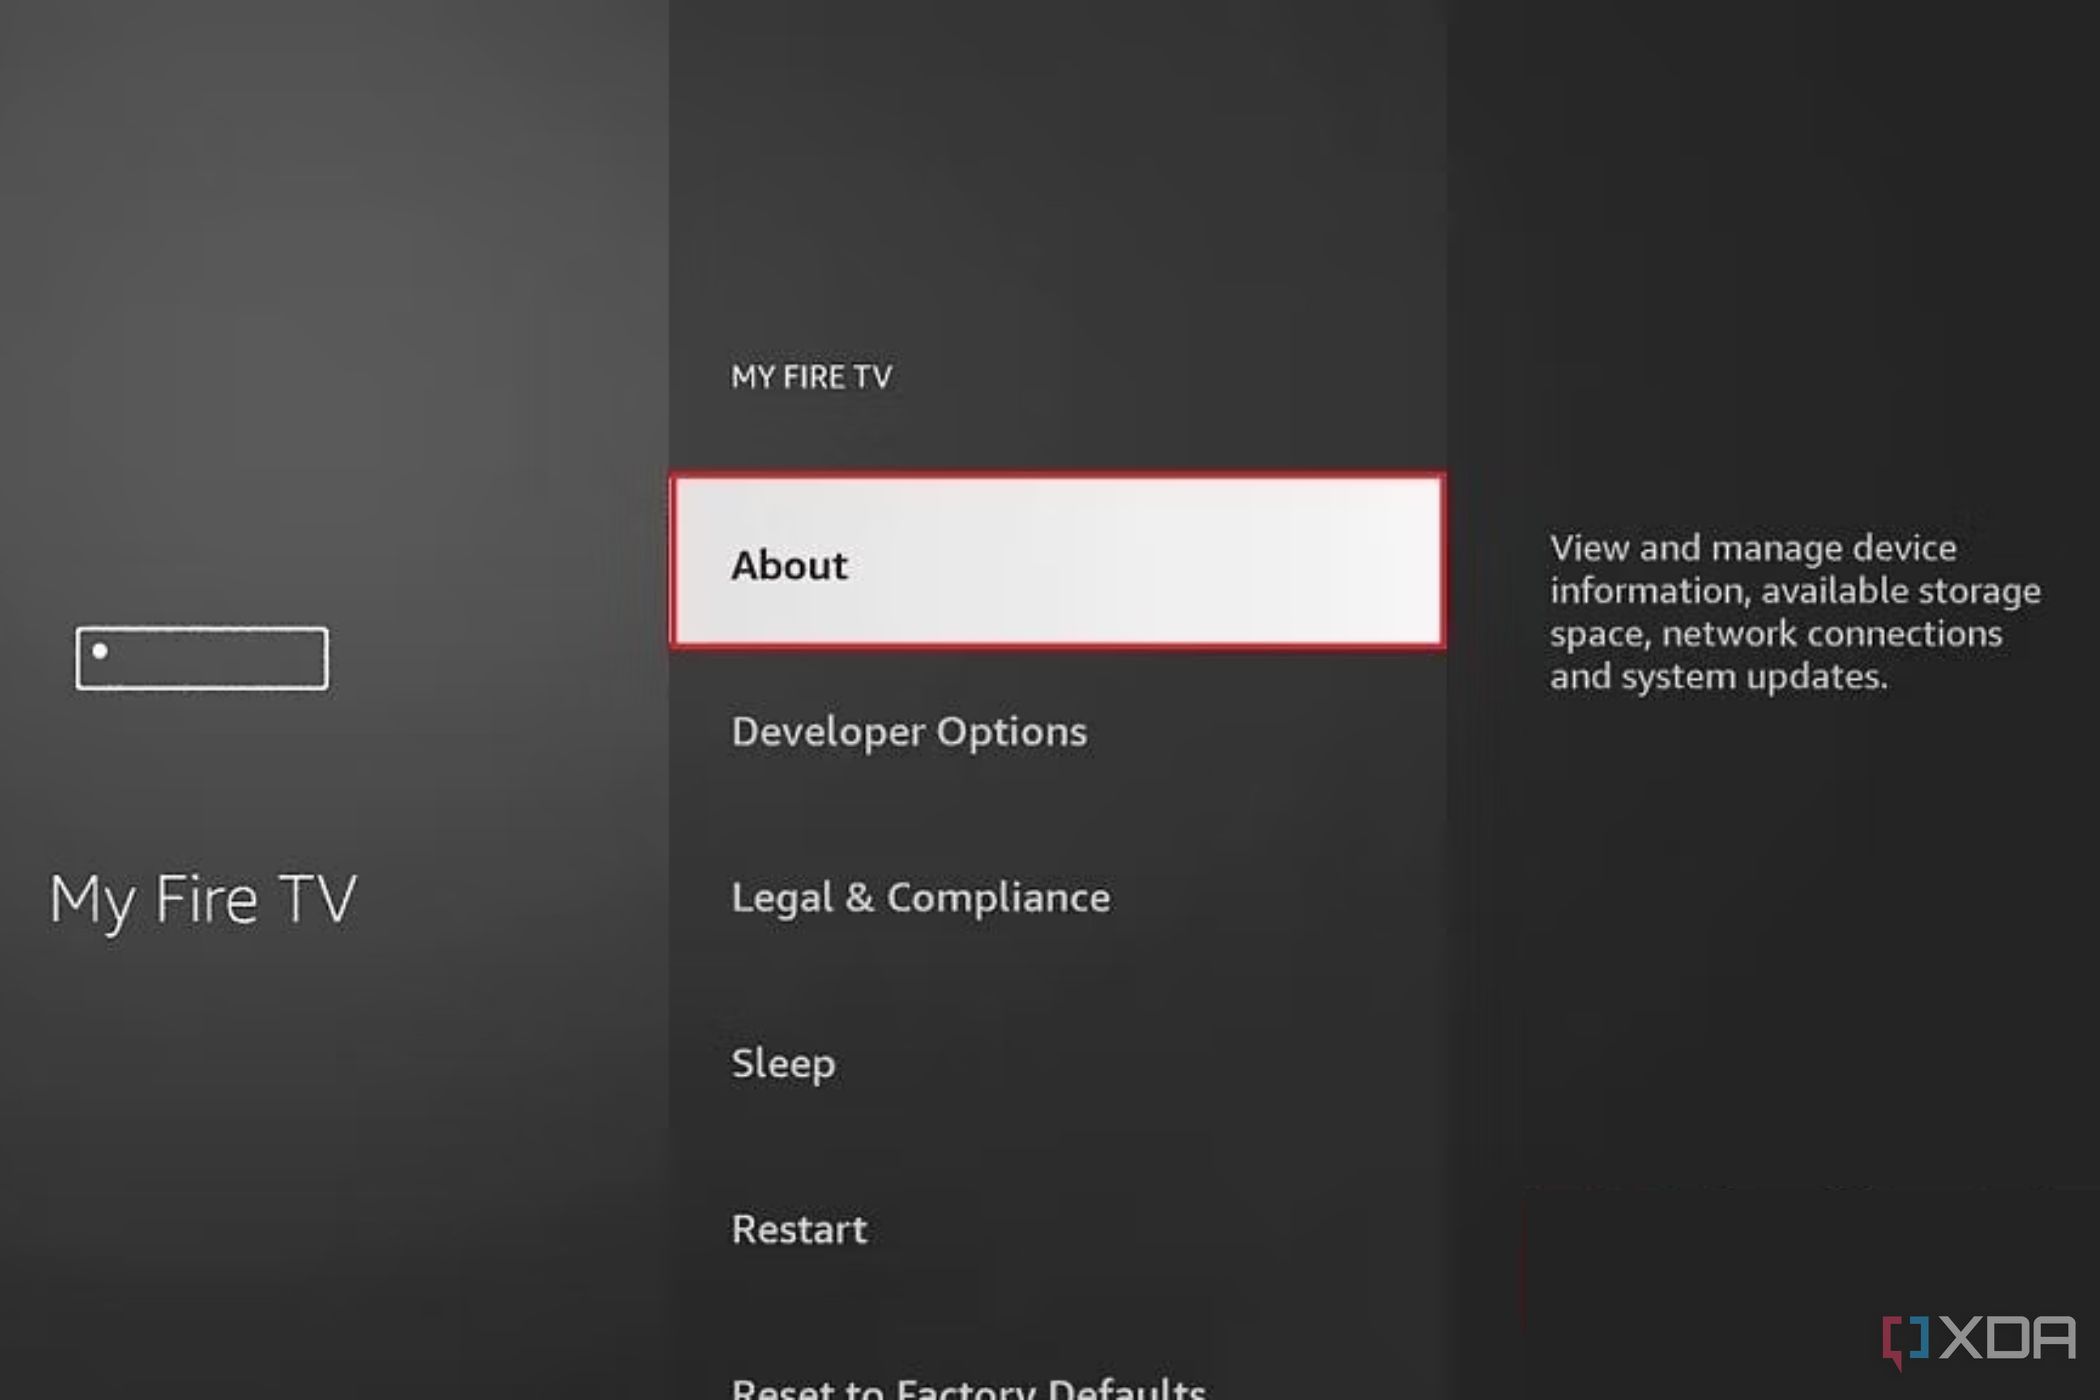 A screenshot showing the highlighted About option in Fire TV settings.